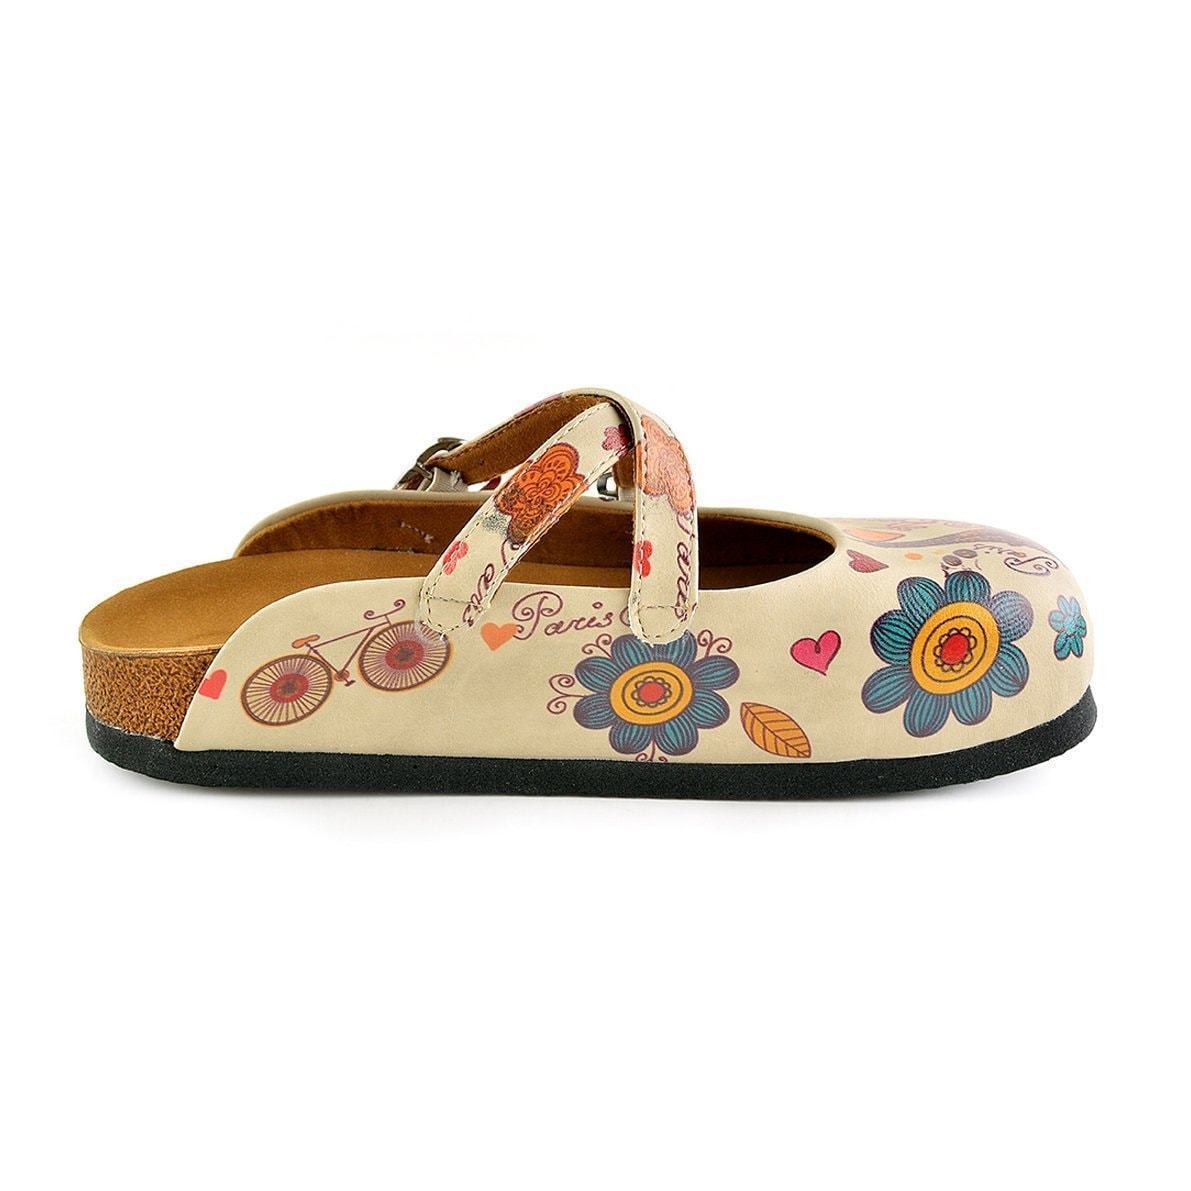 Cream & Pink Love Clogs CAL144 - Goby CALCEO Clogs 